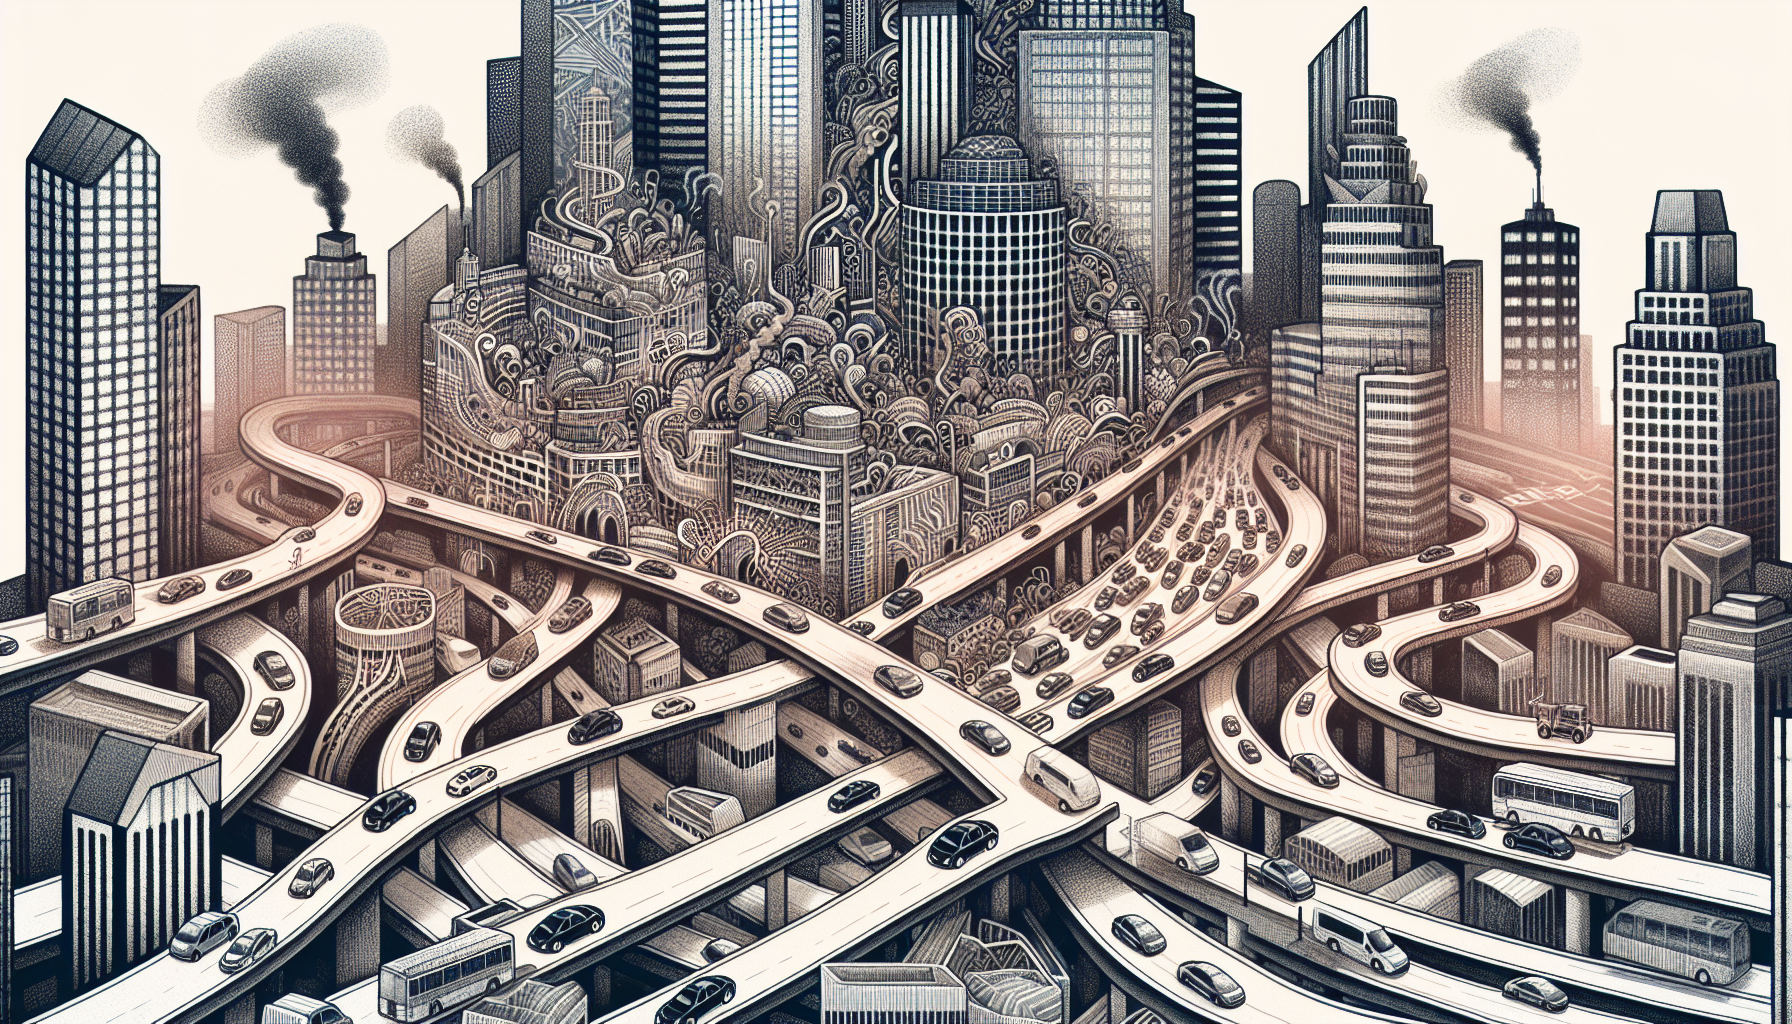 Illustration of a cityscape with urban driving challenges